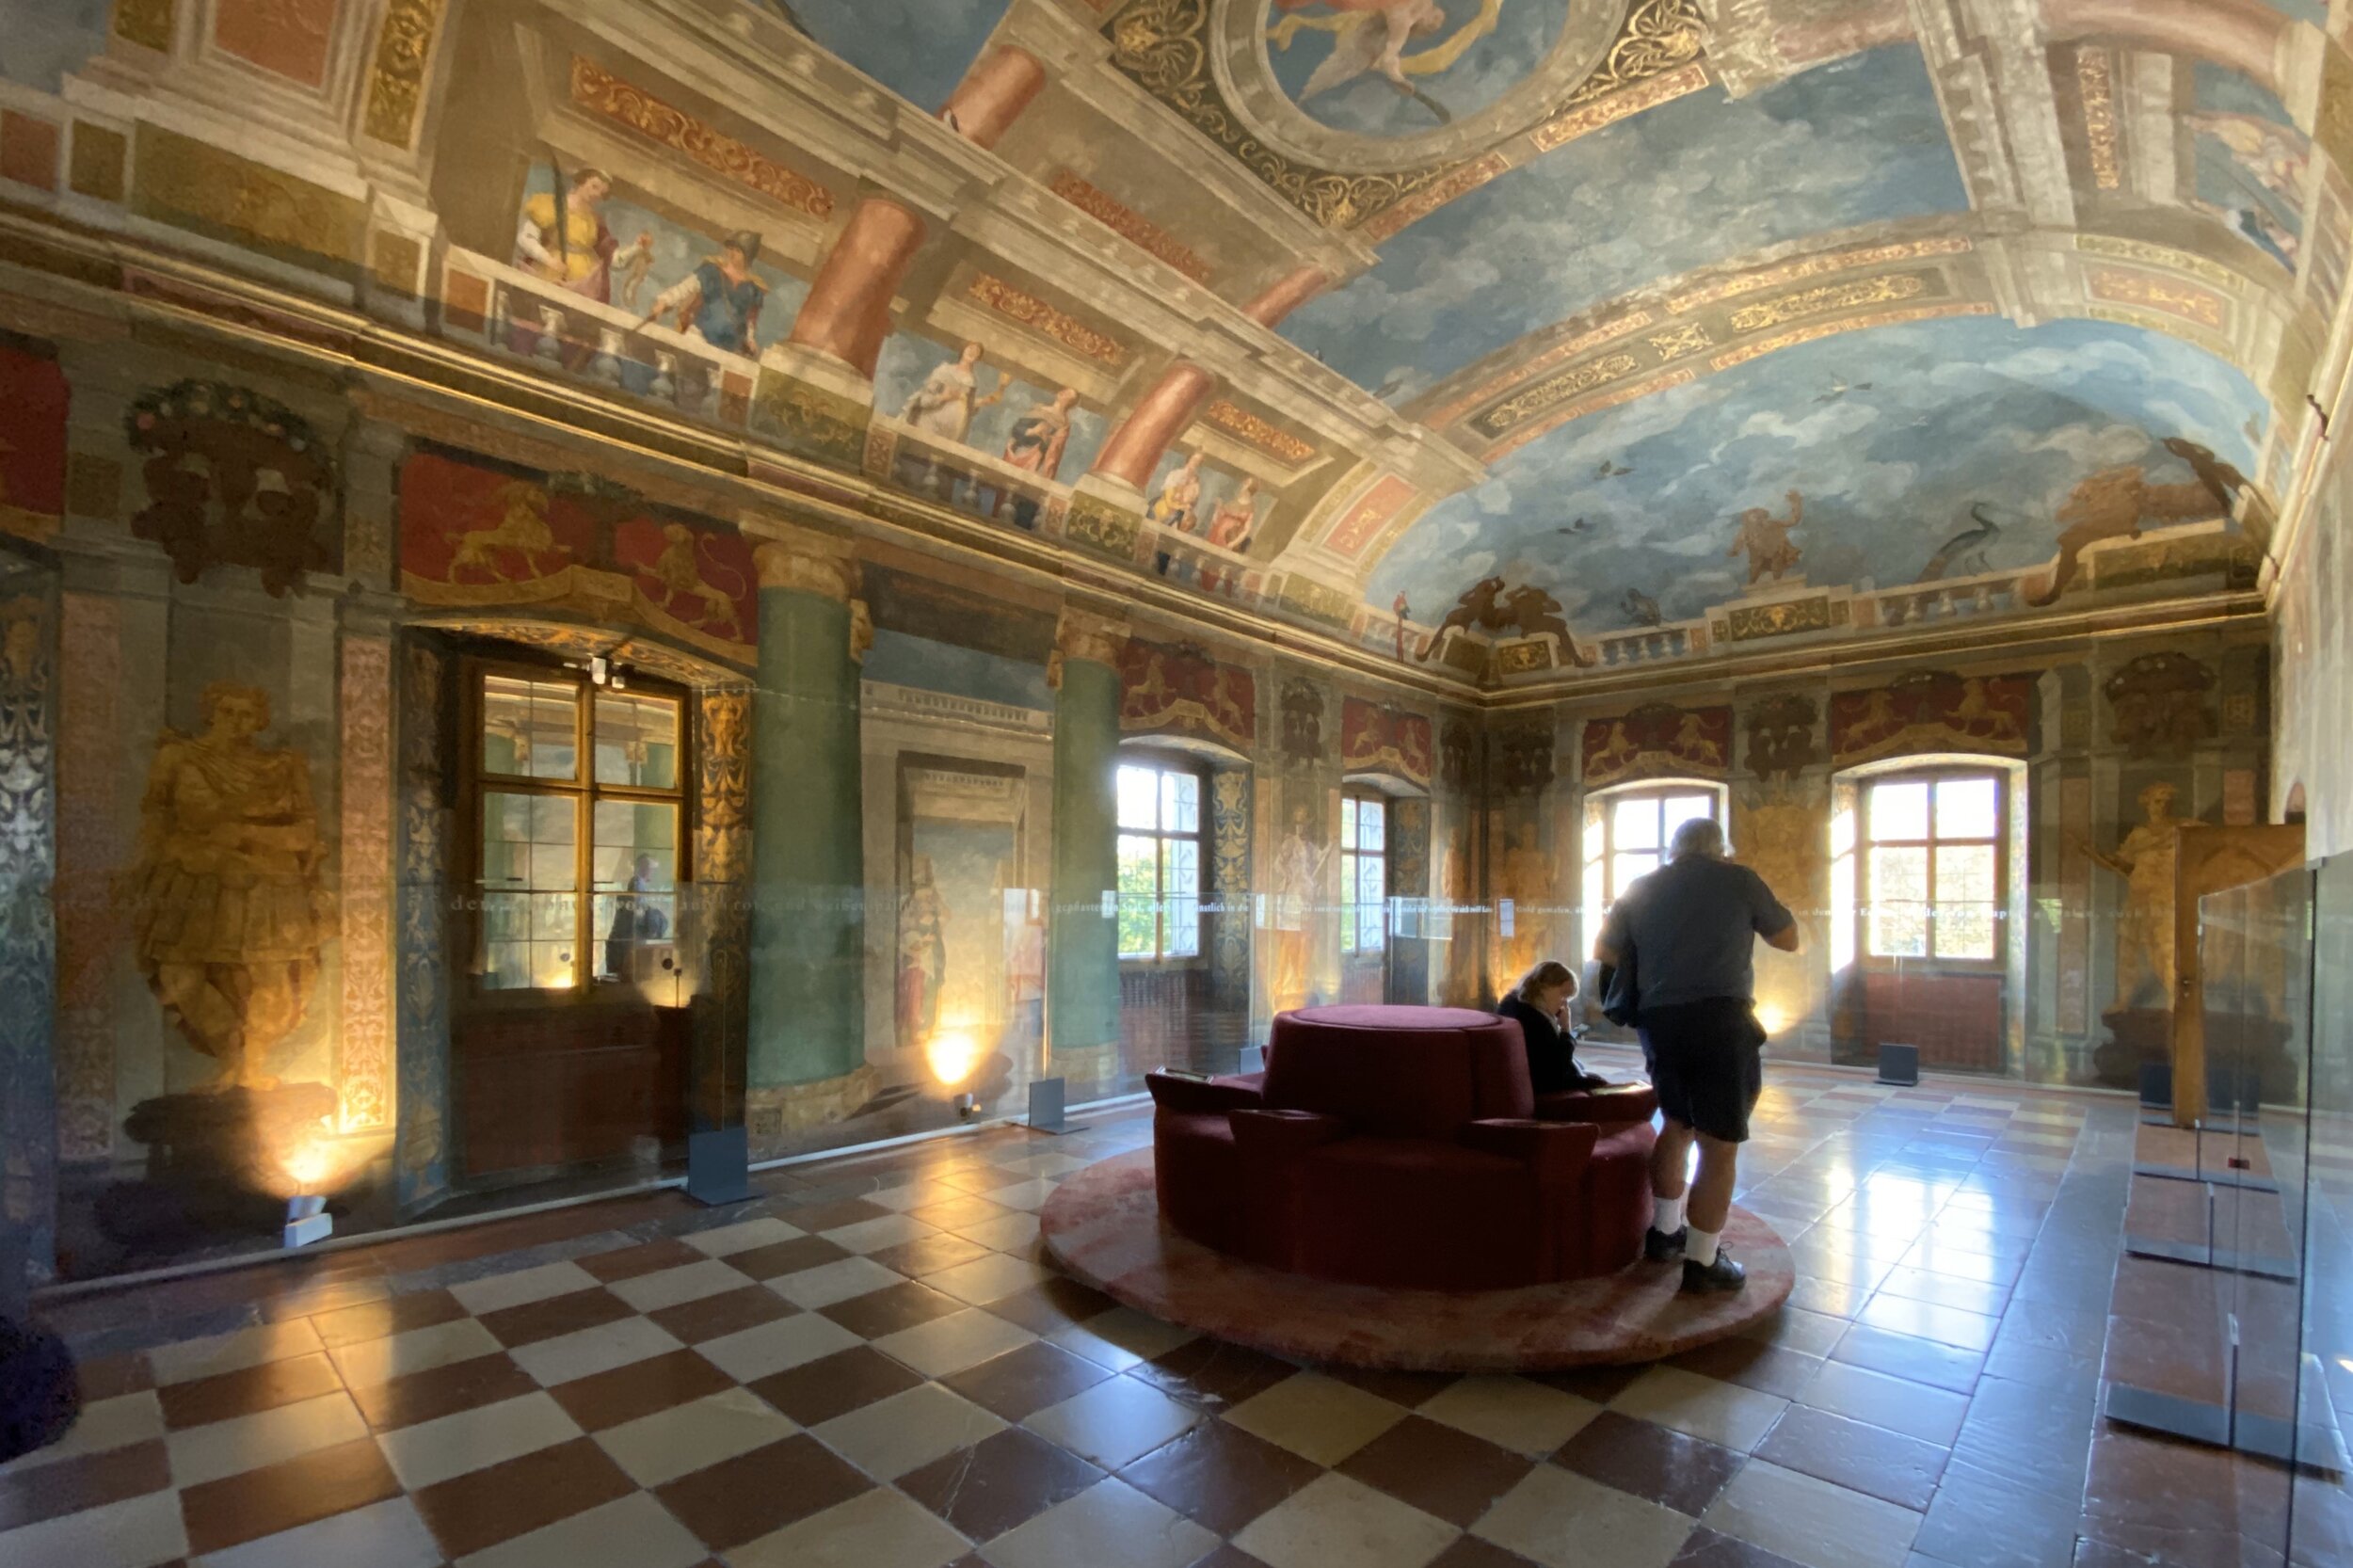  Ceremonial hall decorated by Fra Arsenio Mascagni, the Italian-born court painter 